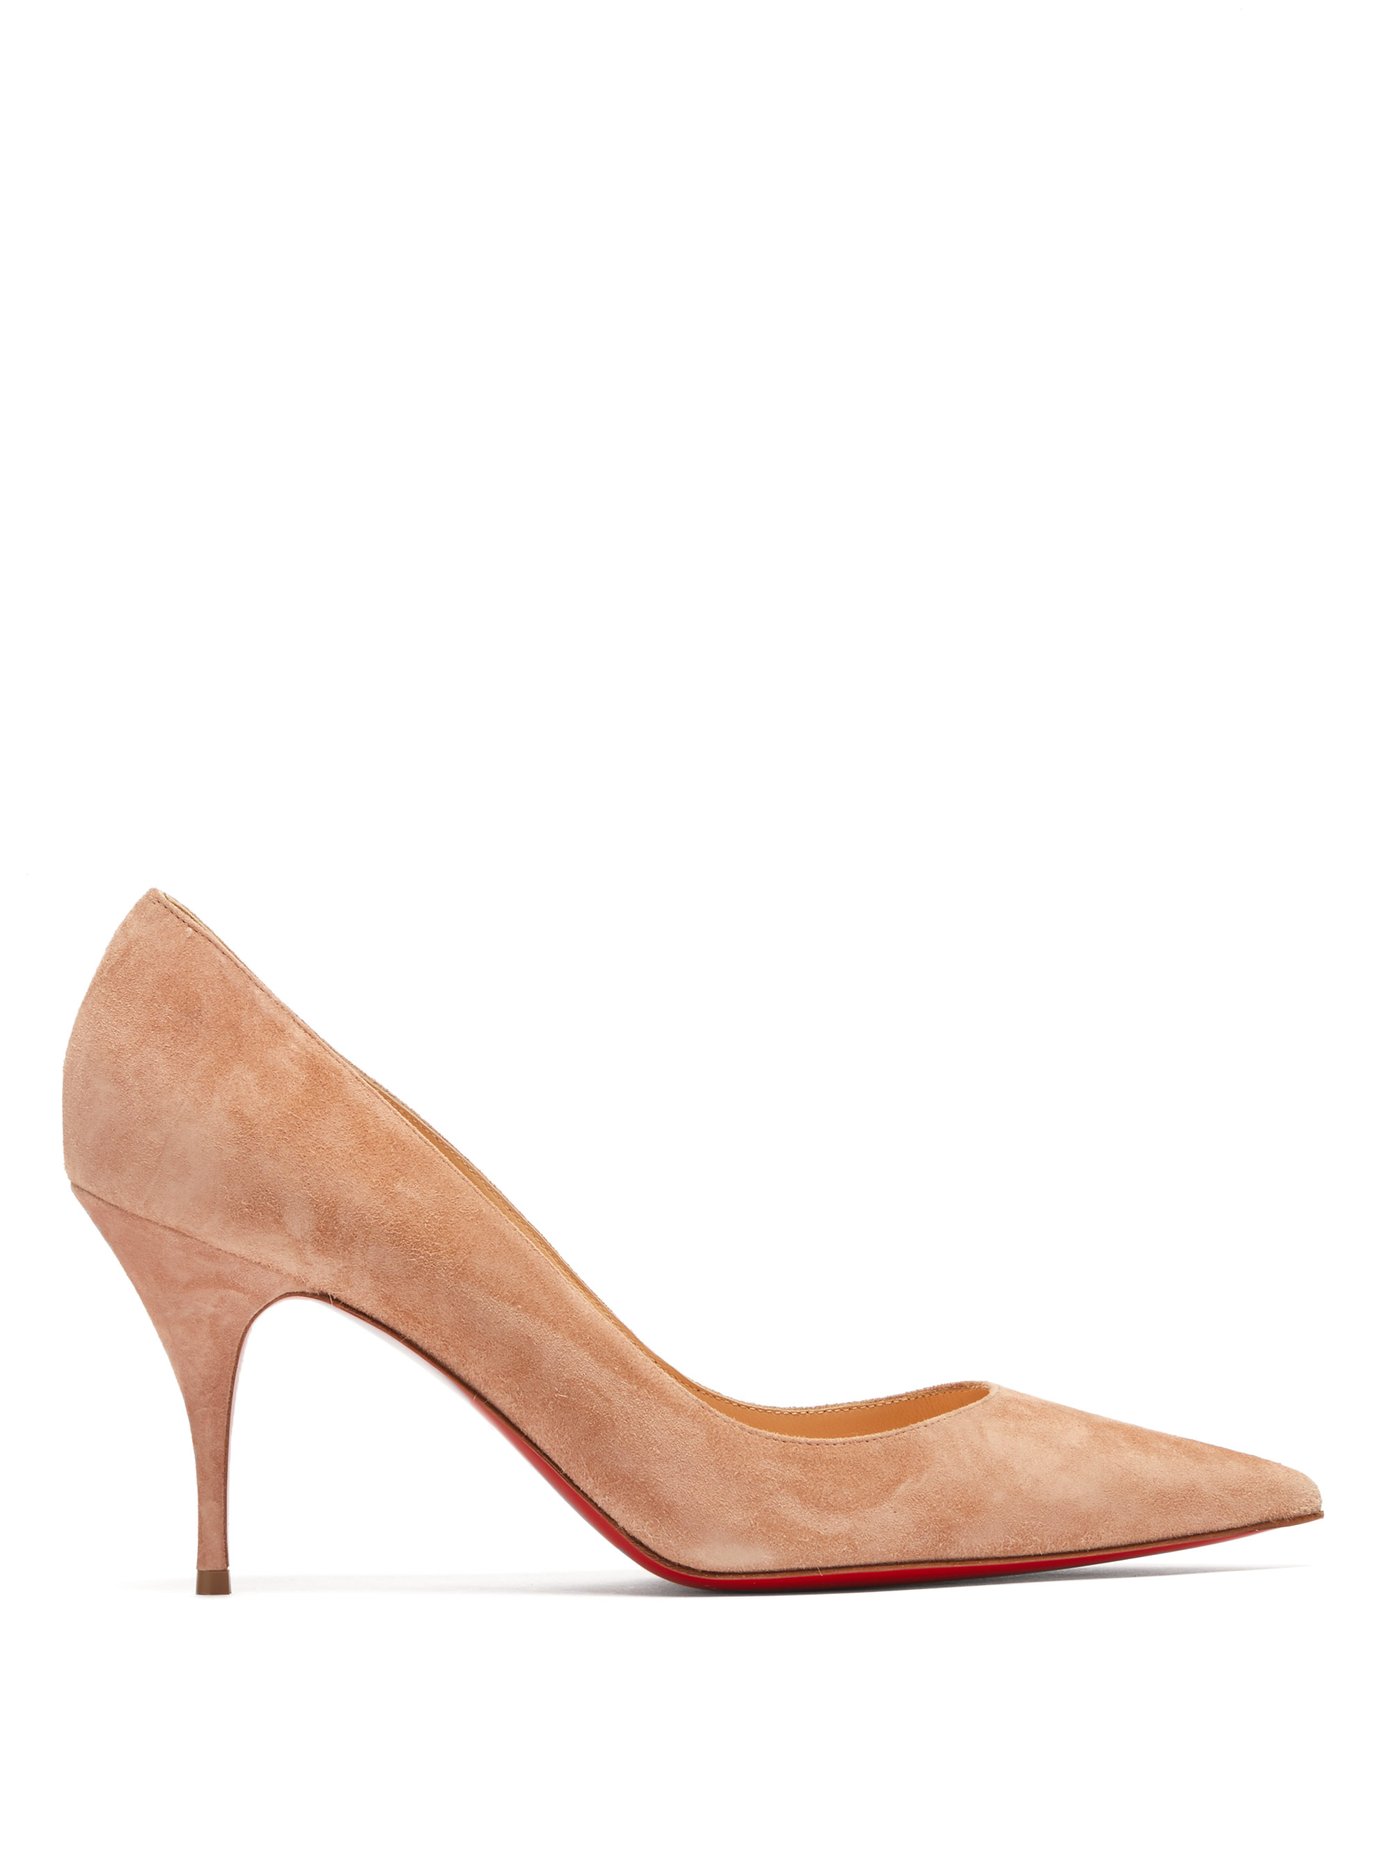 Clare 80 suede pumps | Christian 